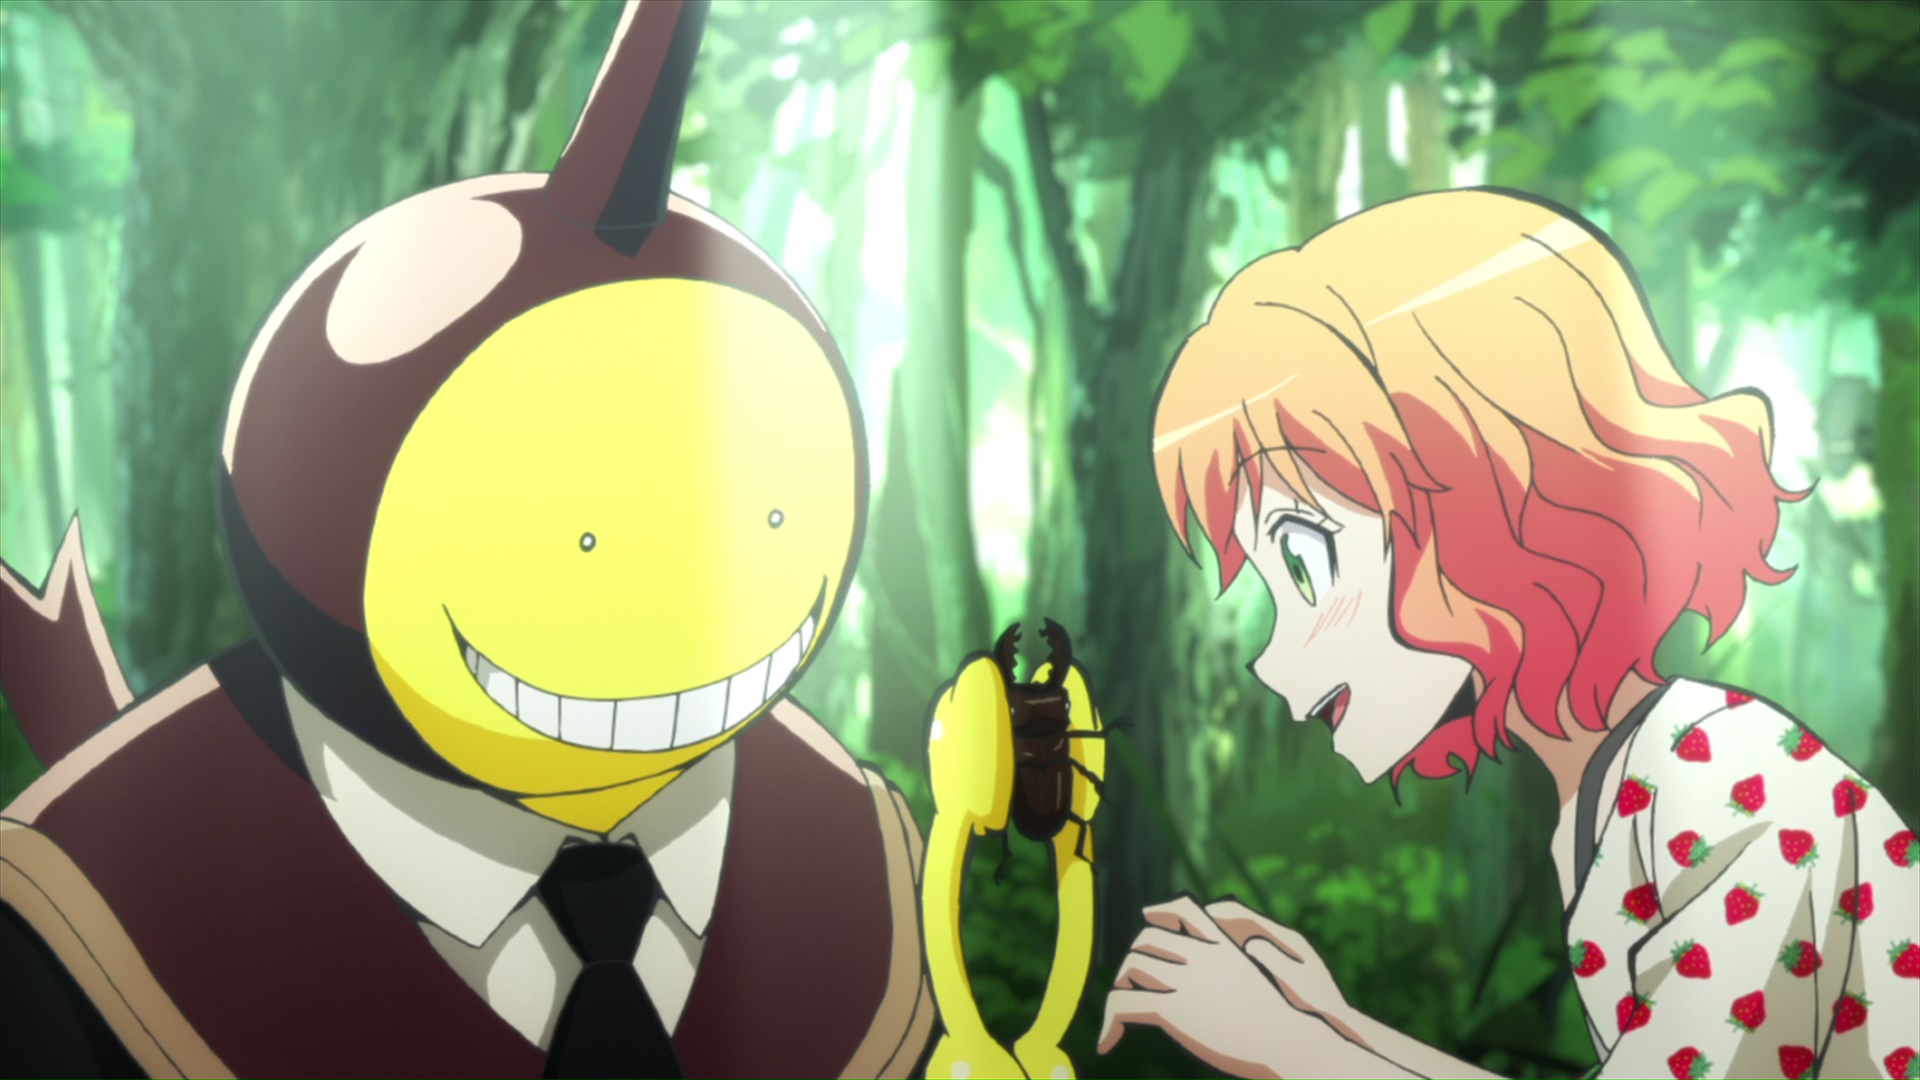 Assassination Classroom Where Can You Watch It Watch Assassination Classroom Season 1 Episode 17 Sub & Dub | Anime